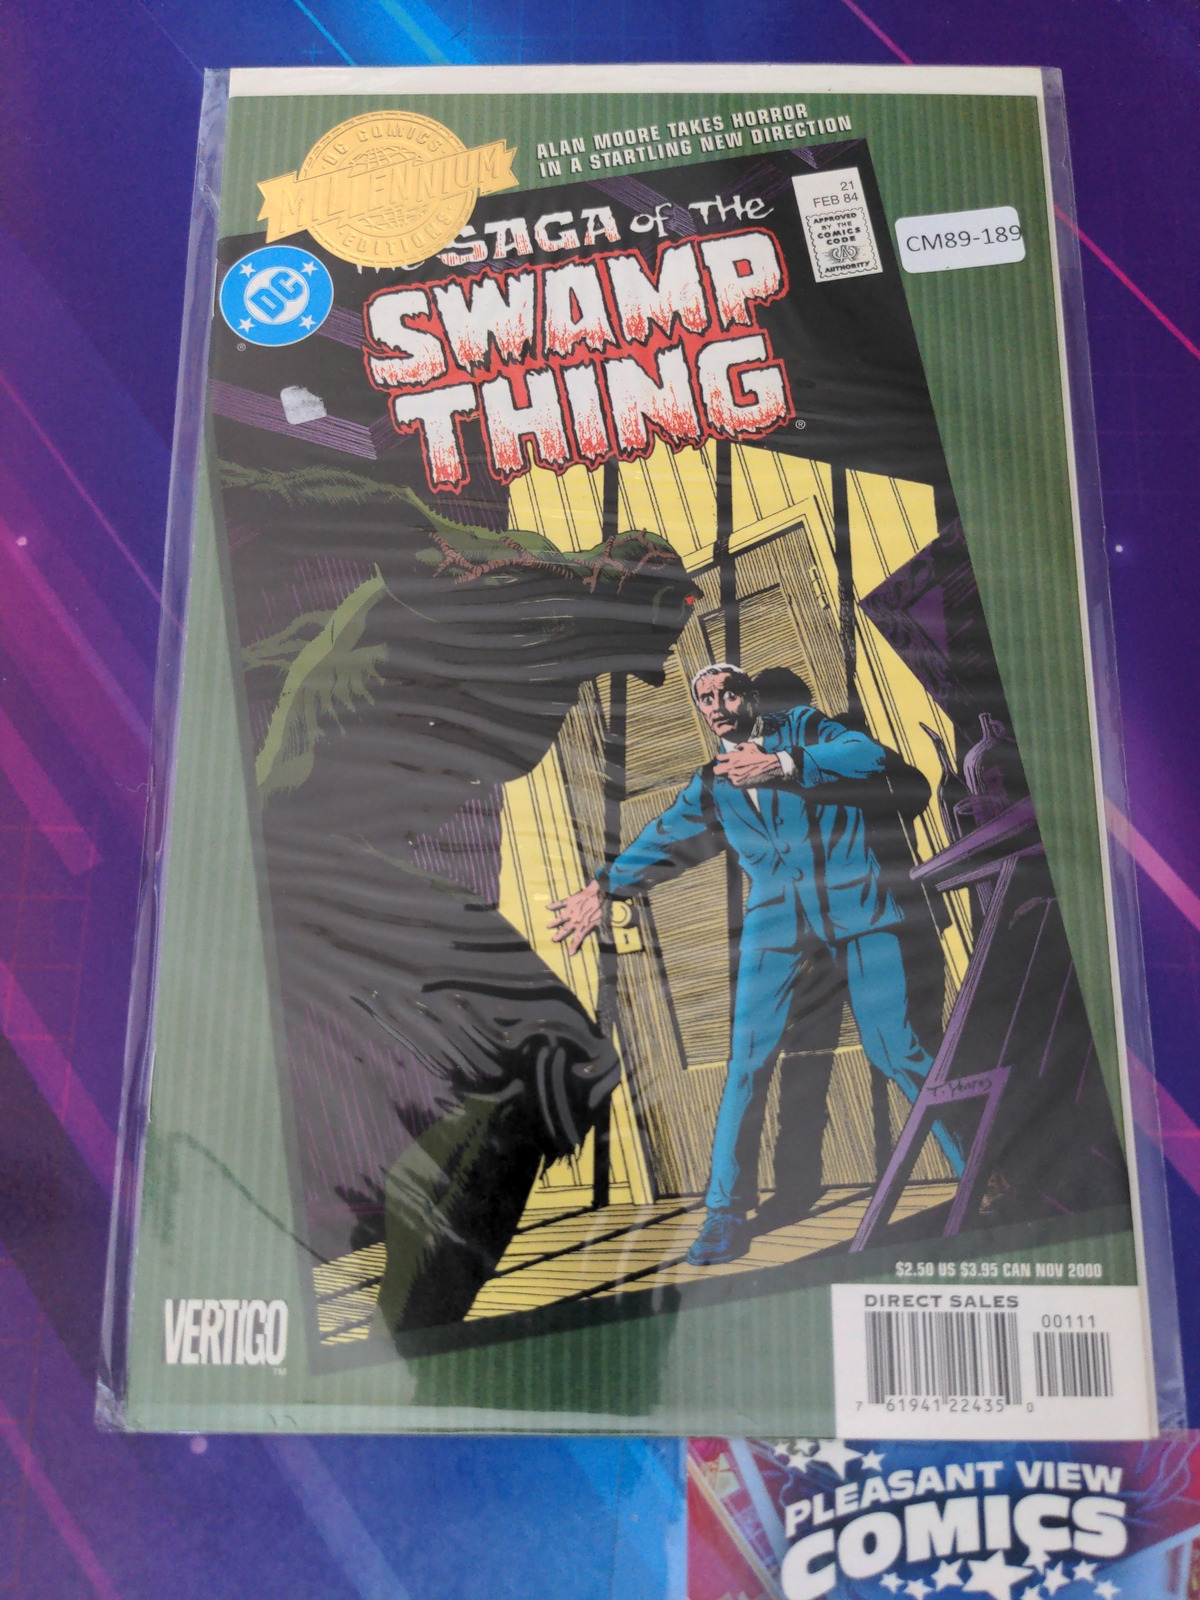 MILLENNIUM EDITION: THE SAGA OF THE SWAMP THING #21 ONE-SHOT HIGH GRADE CM89-189